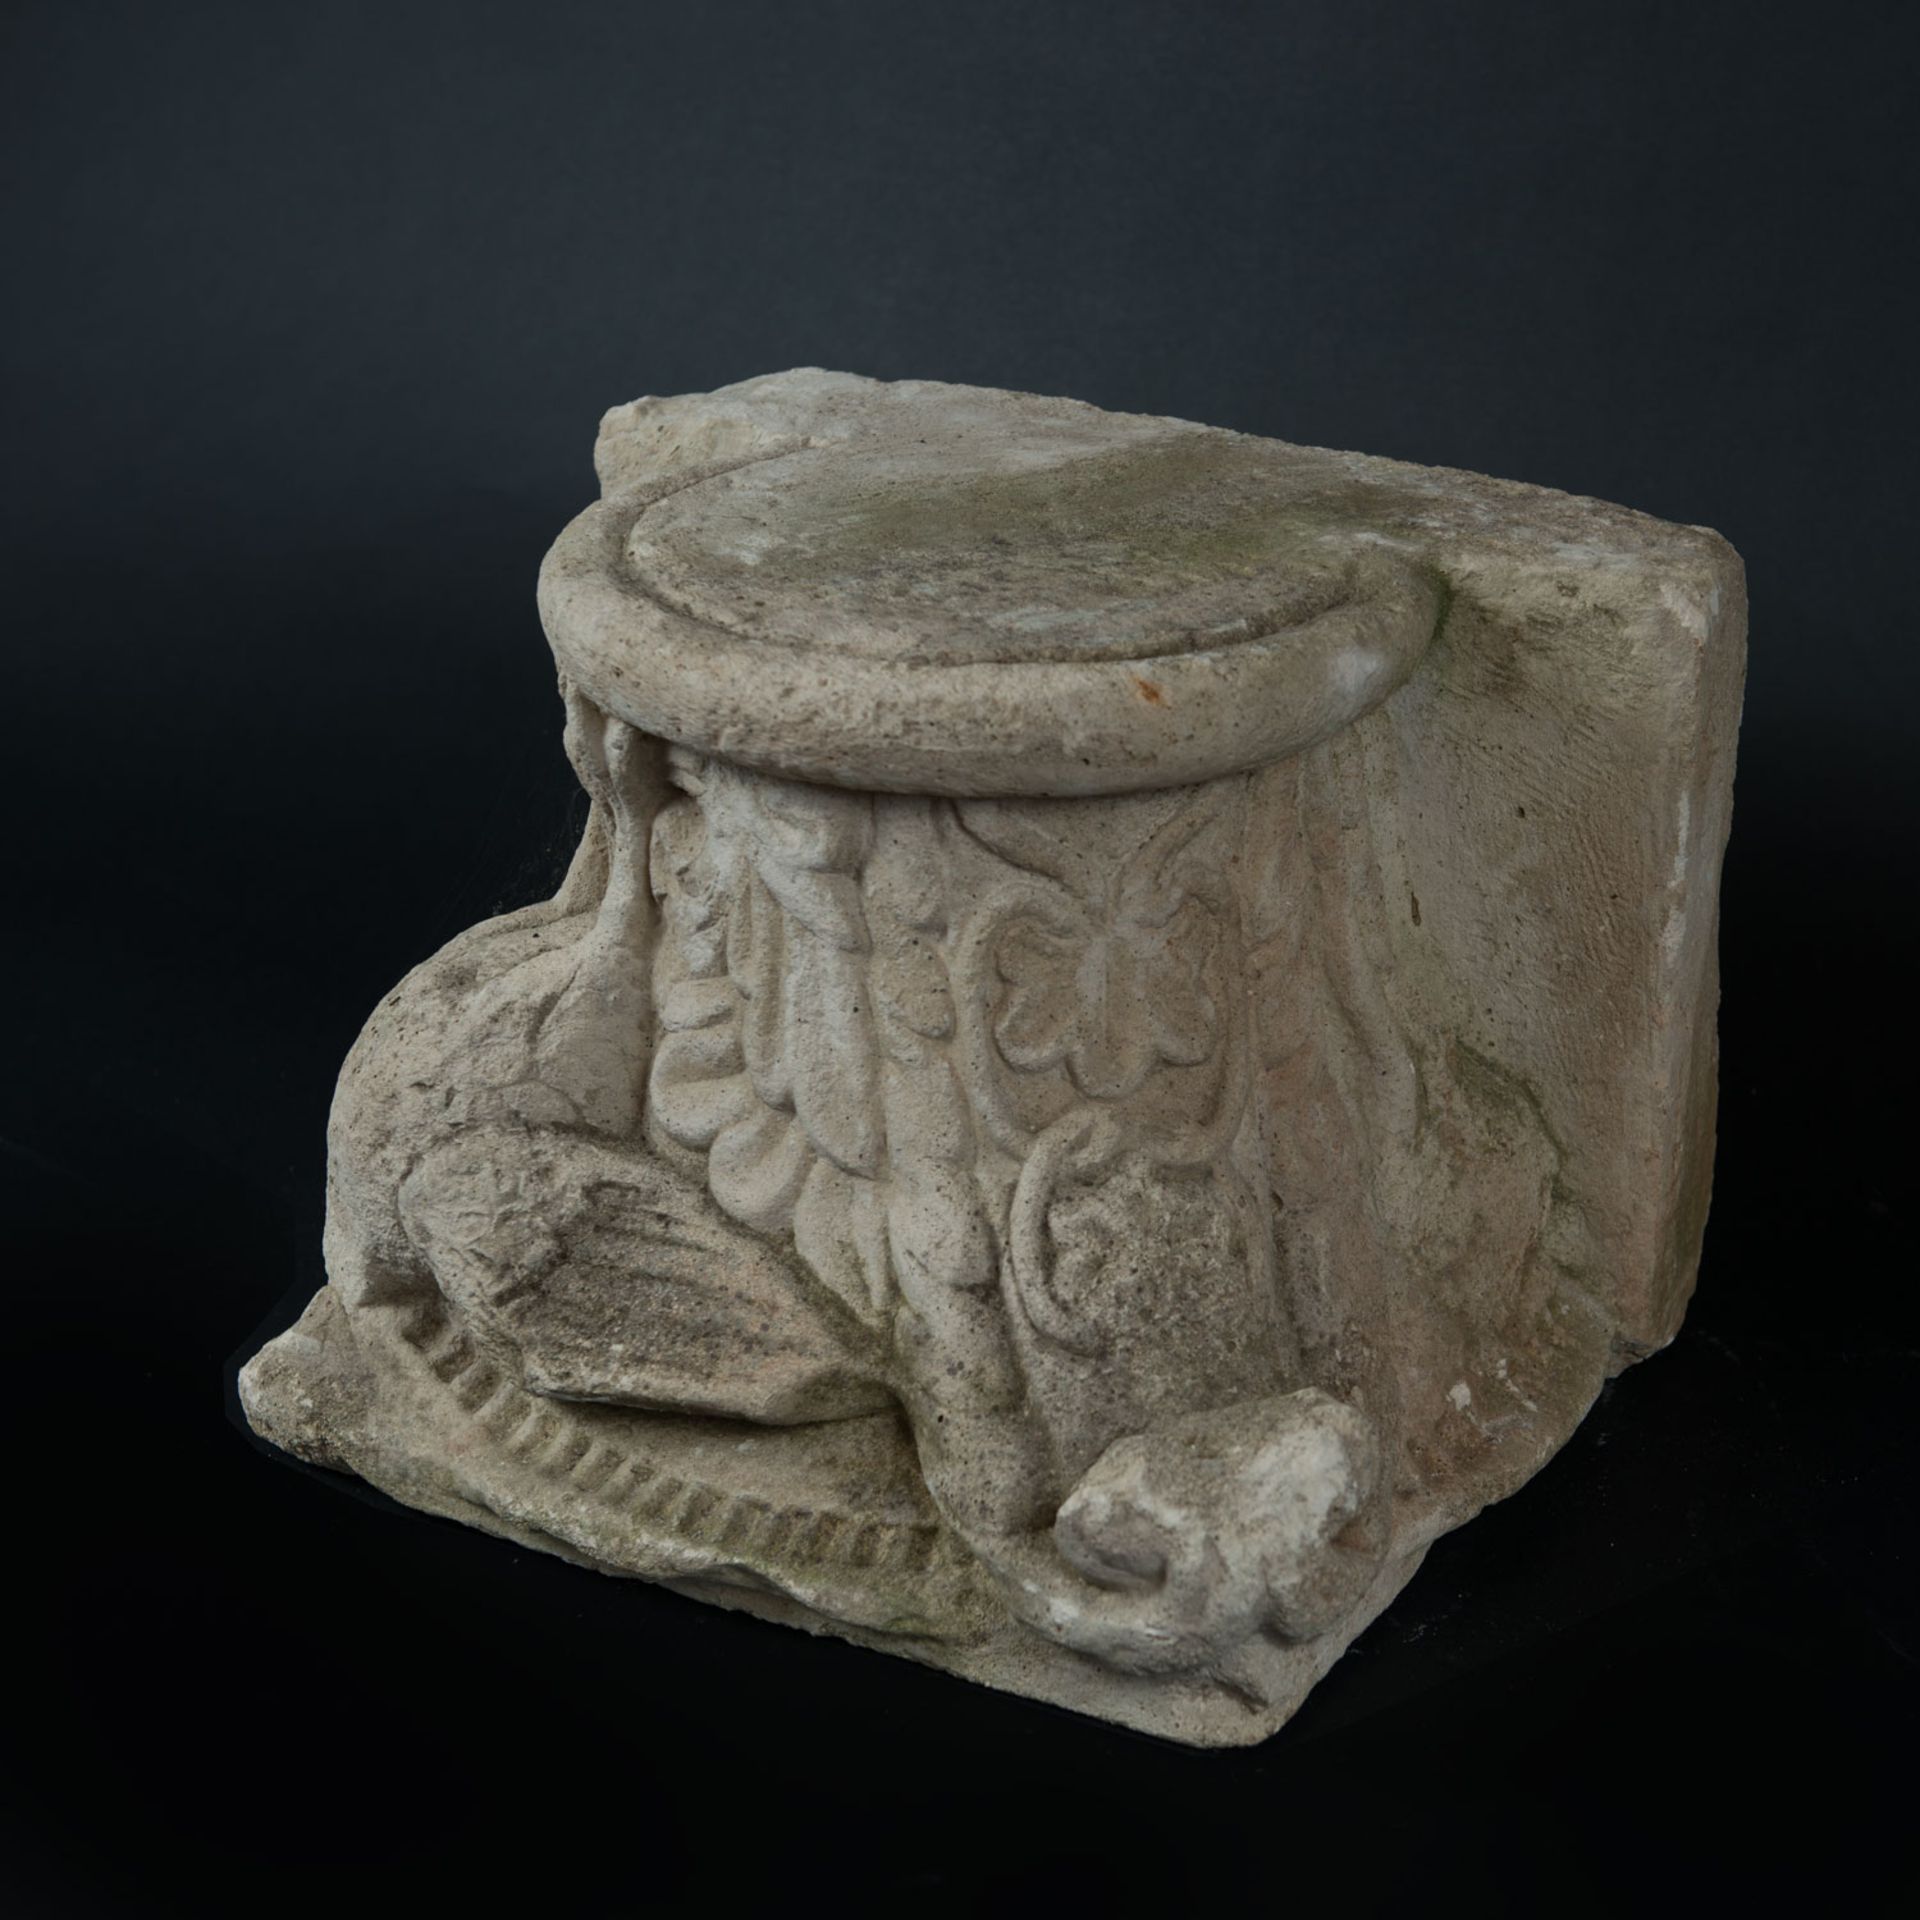 Capital in medieval manner - Image 2 of 3